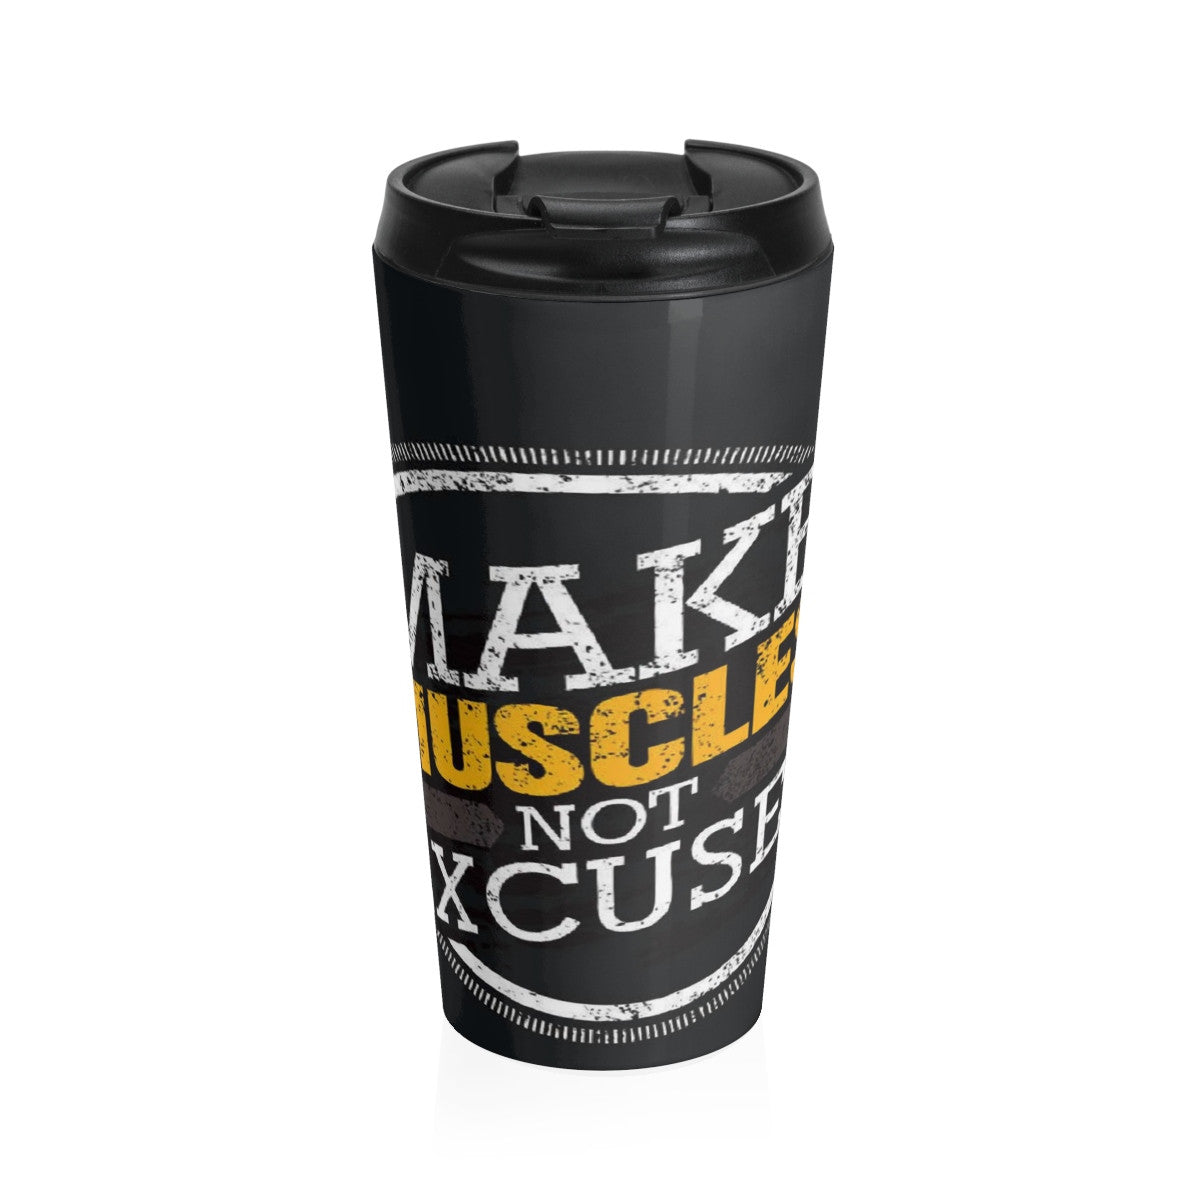 Make muscles not excuses Stainless Steel Travel Mug